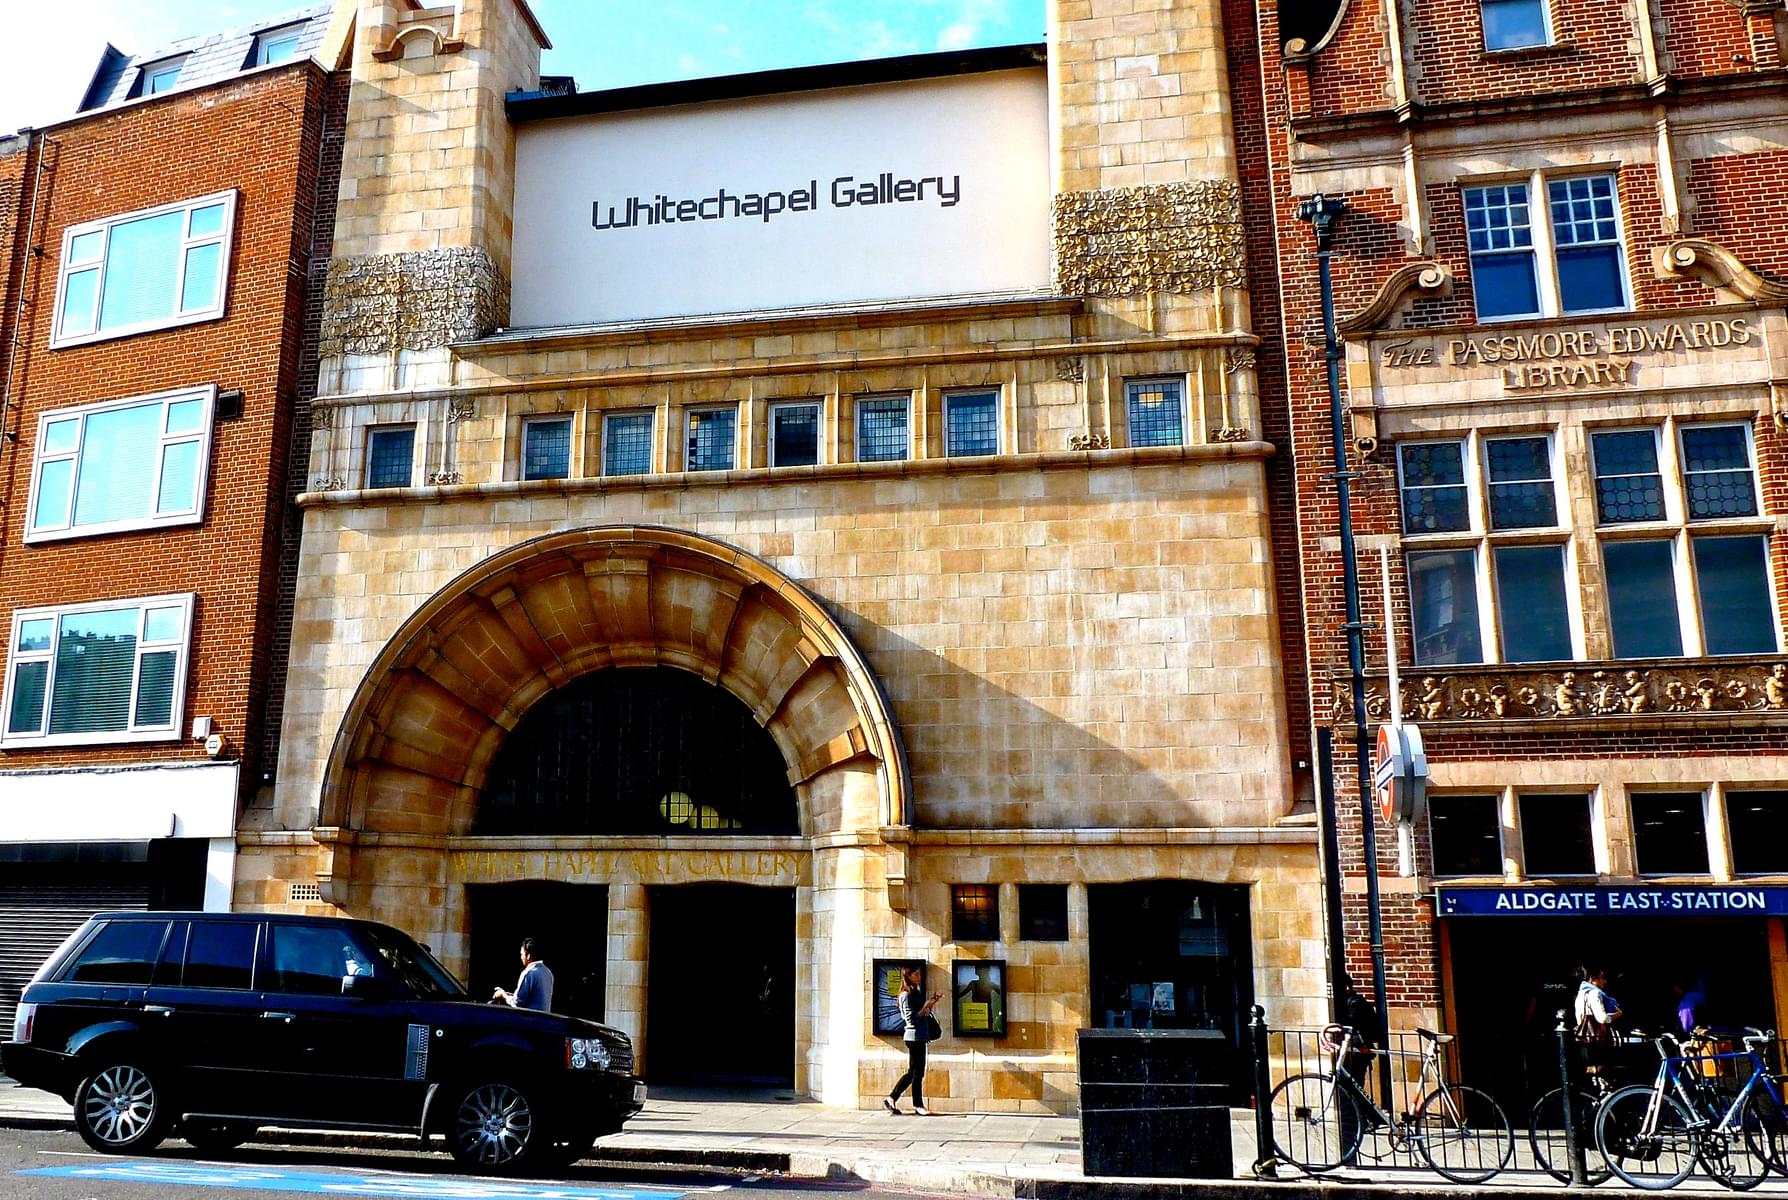 See Art At The Whitechapel Gallery